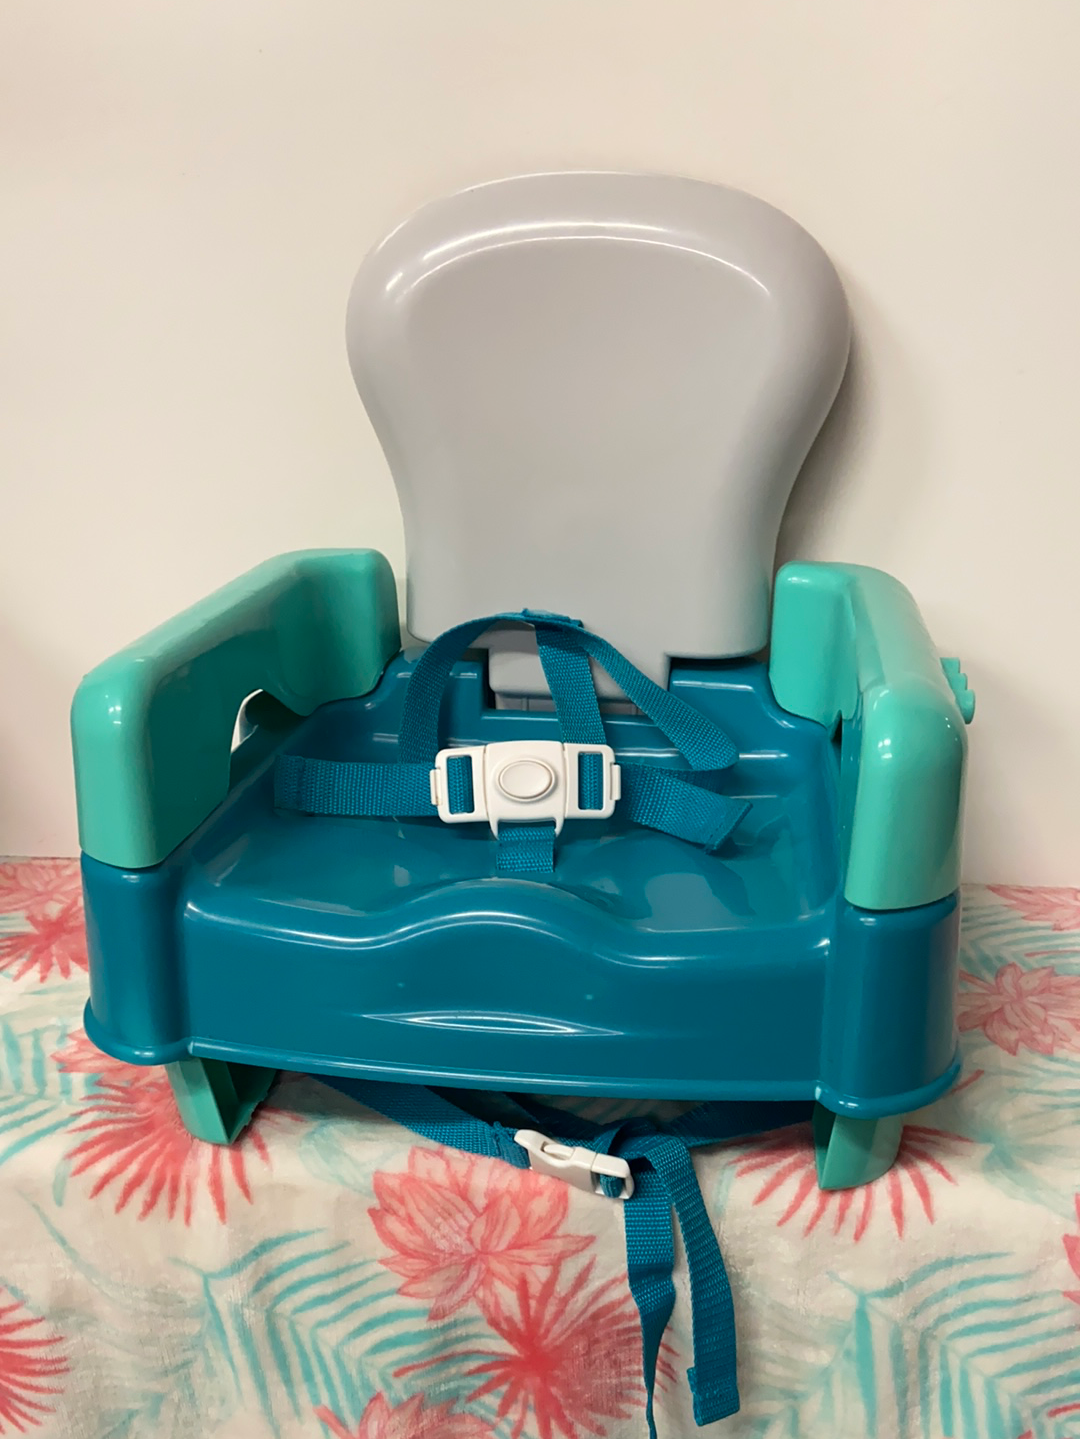 Safety 1st Booster Seat, No Tray